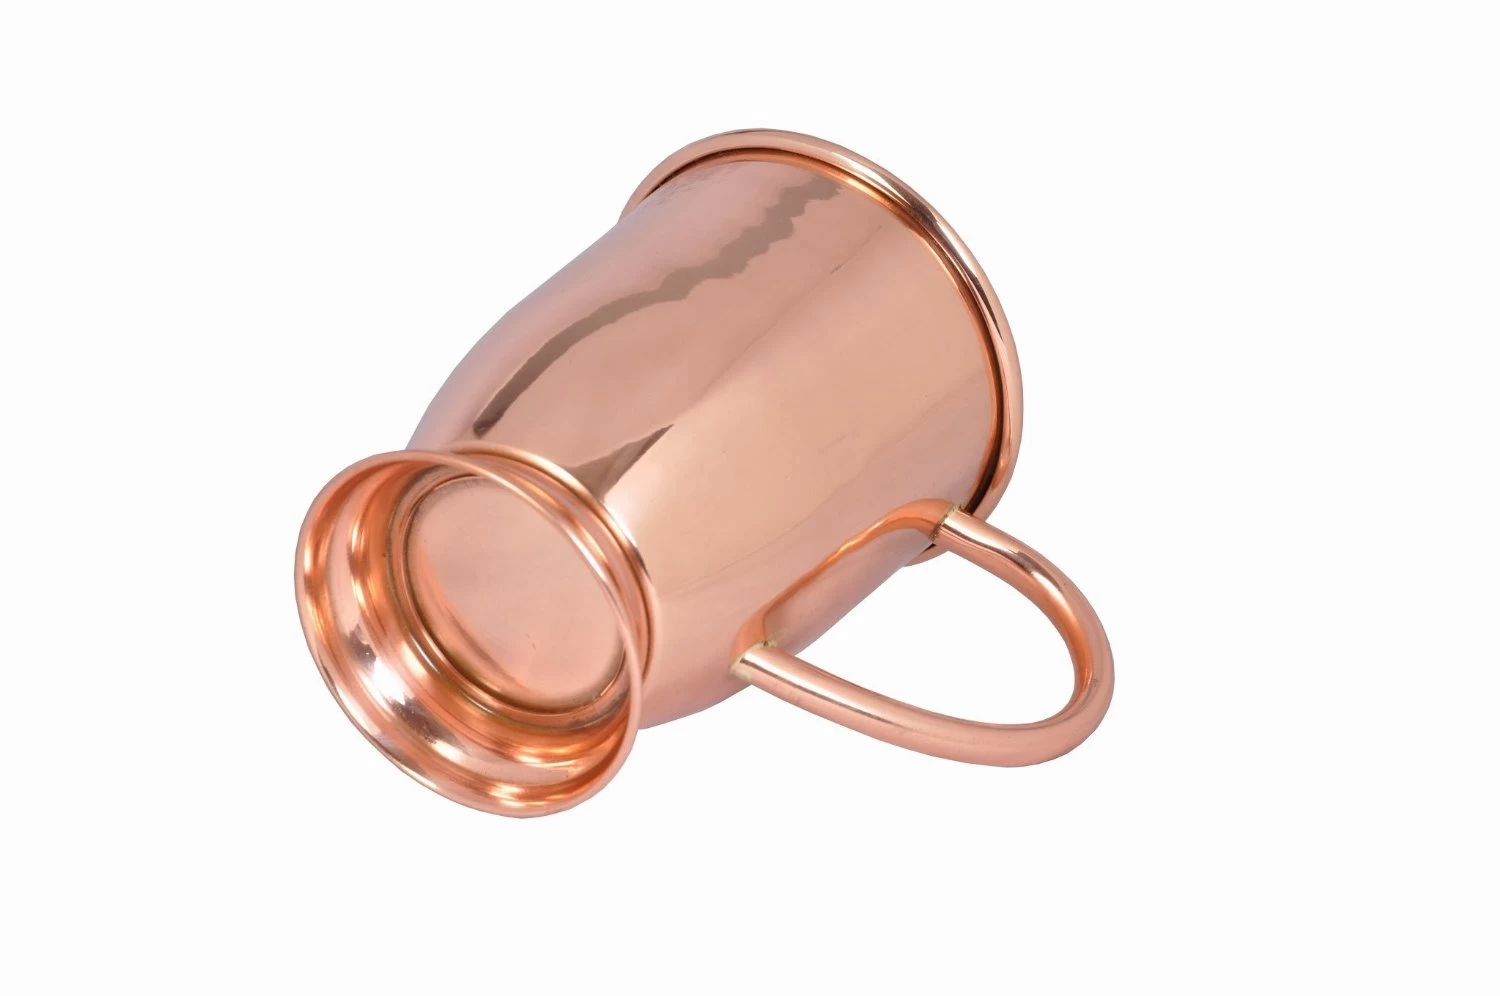 Copper plated Stainless Steel Moscow Mule Mug with Base